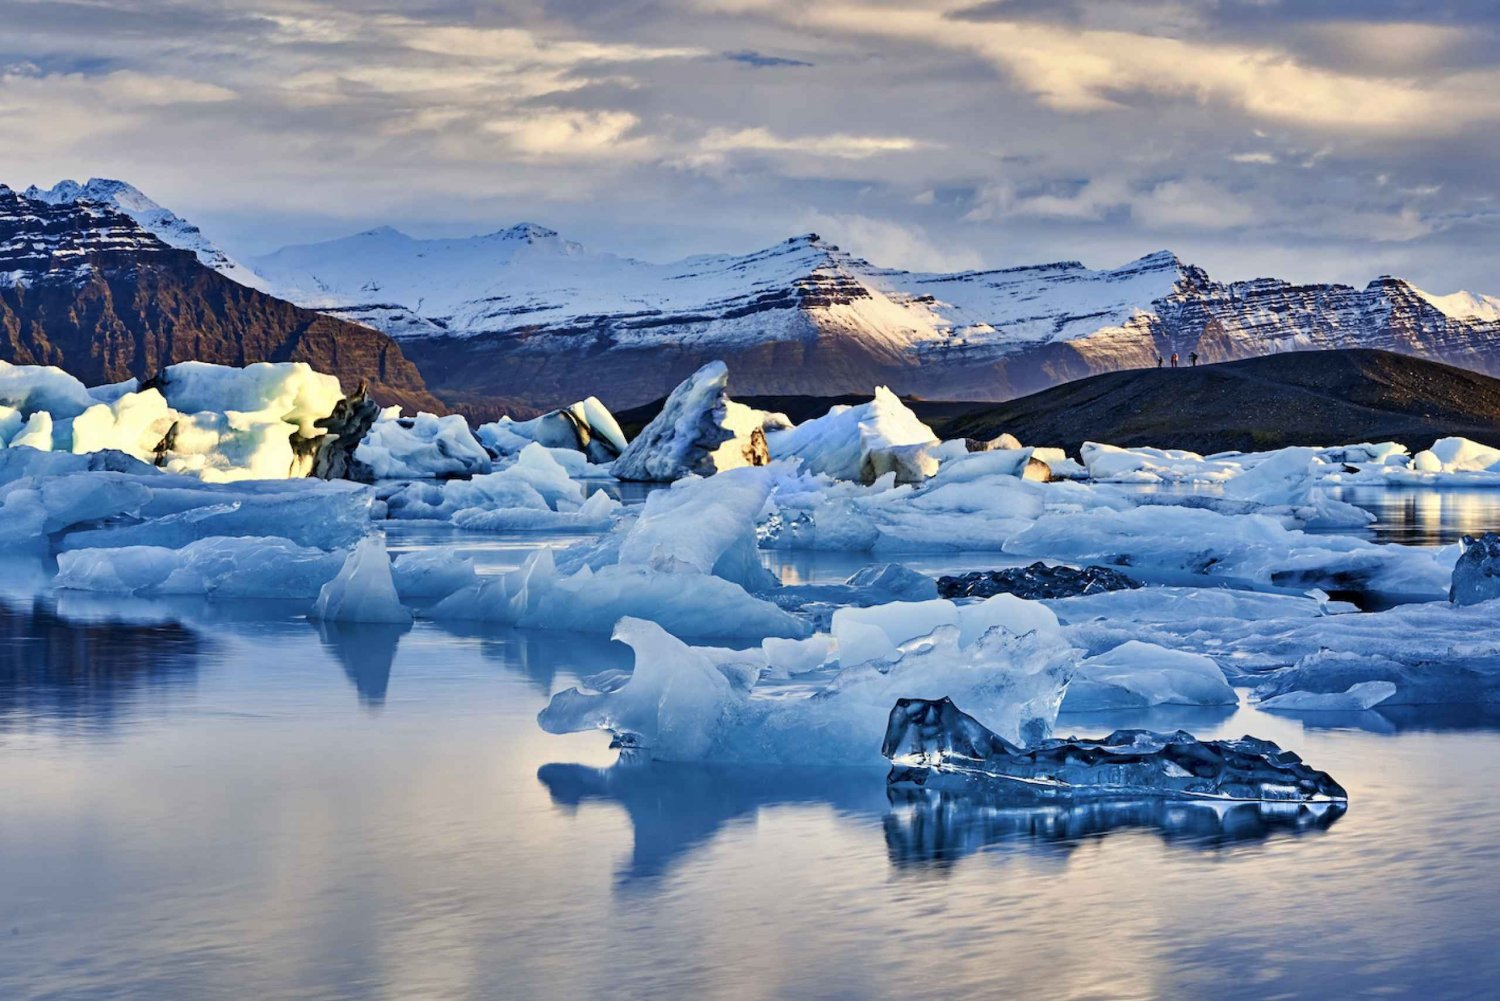 From Reykjavik: Winter 6-Day Small Group Tour of Iceland